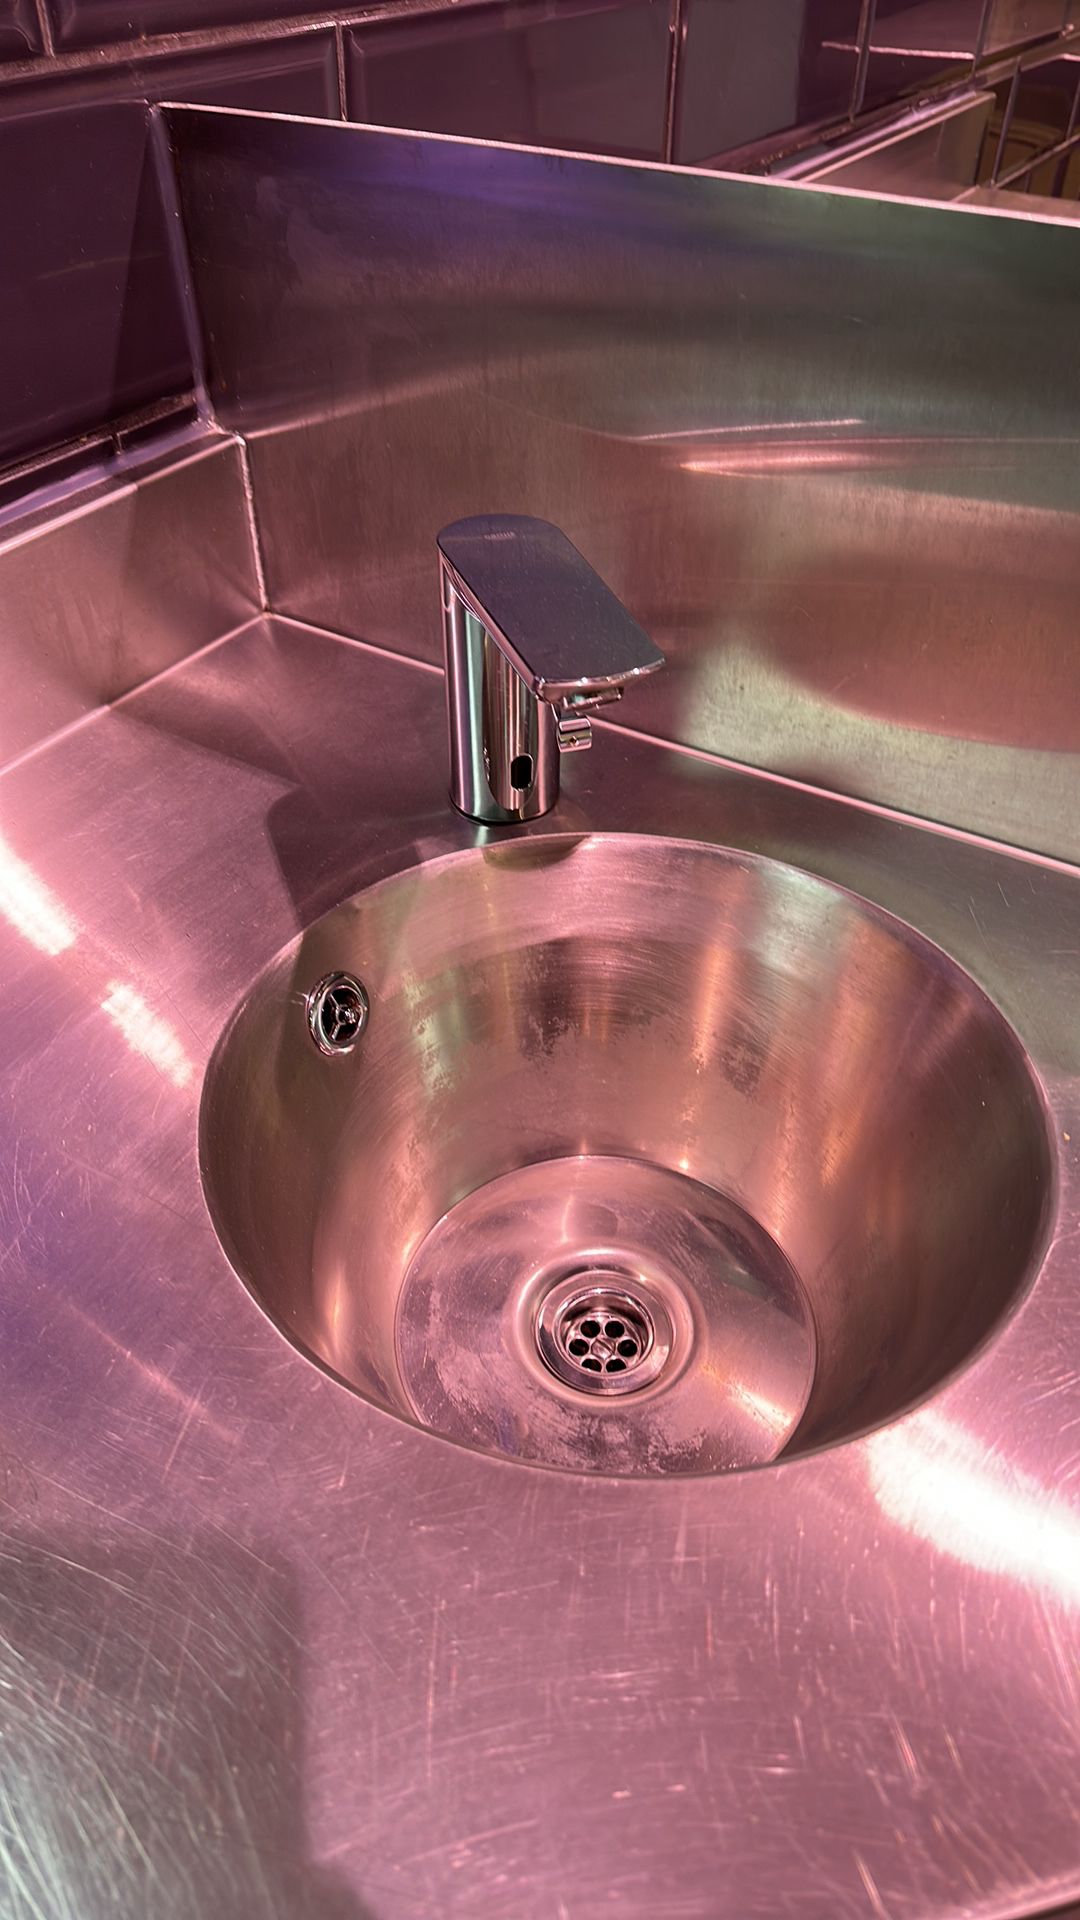 Stainless Steel Counter Worktop with Hand-washing Station - Image 5 of 5